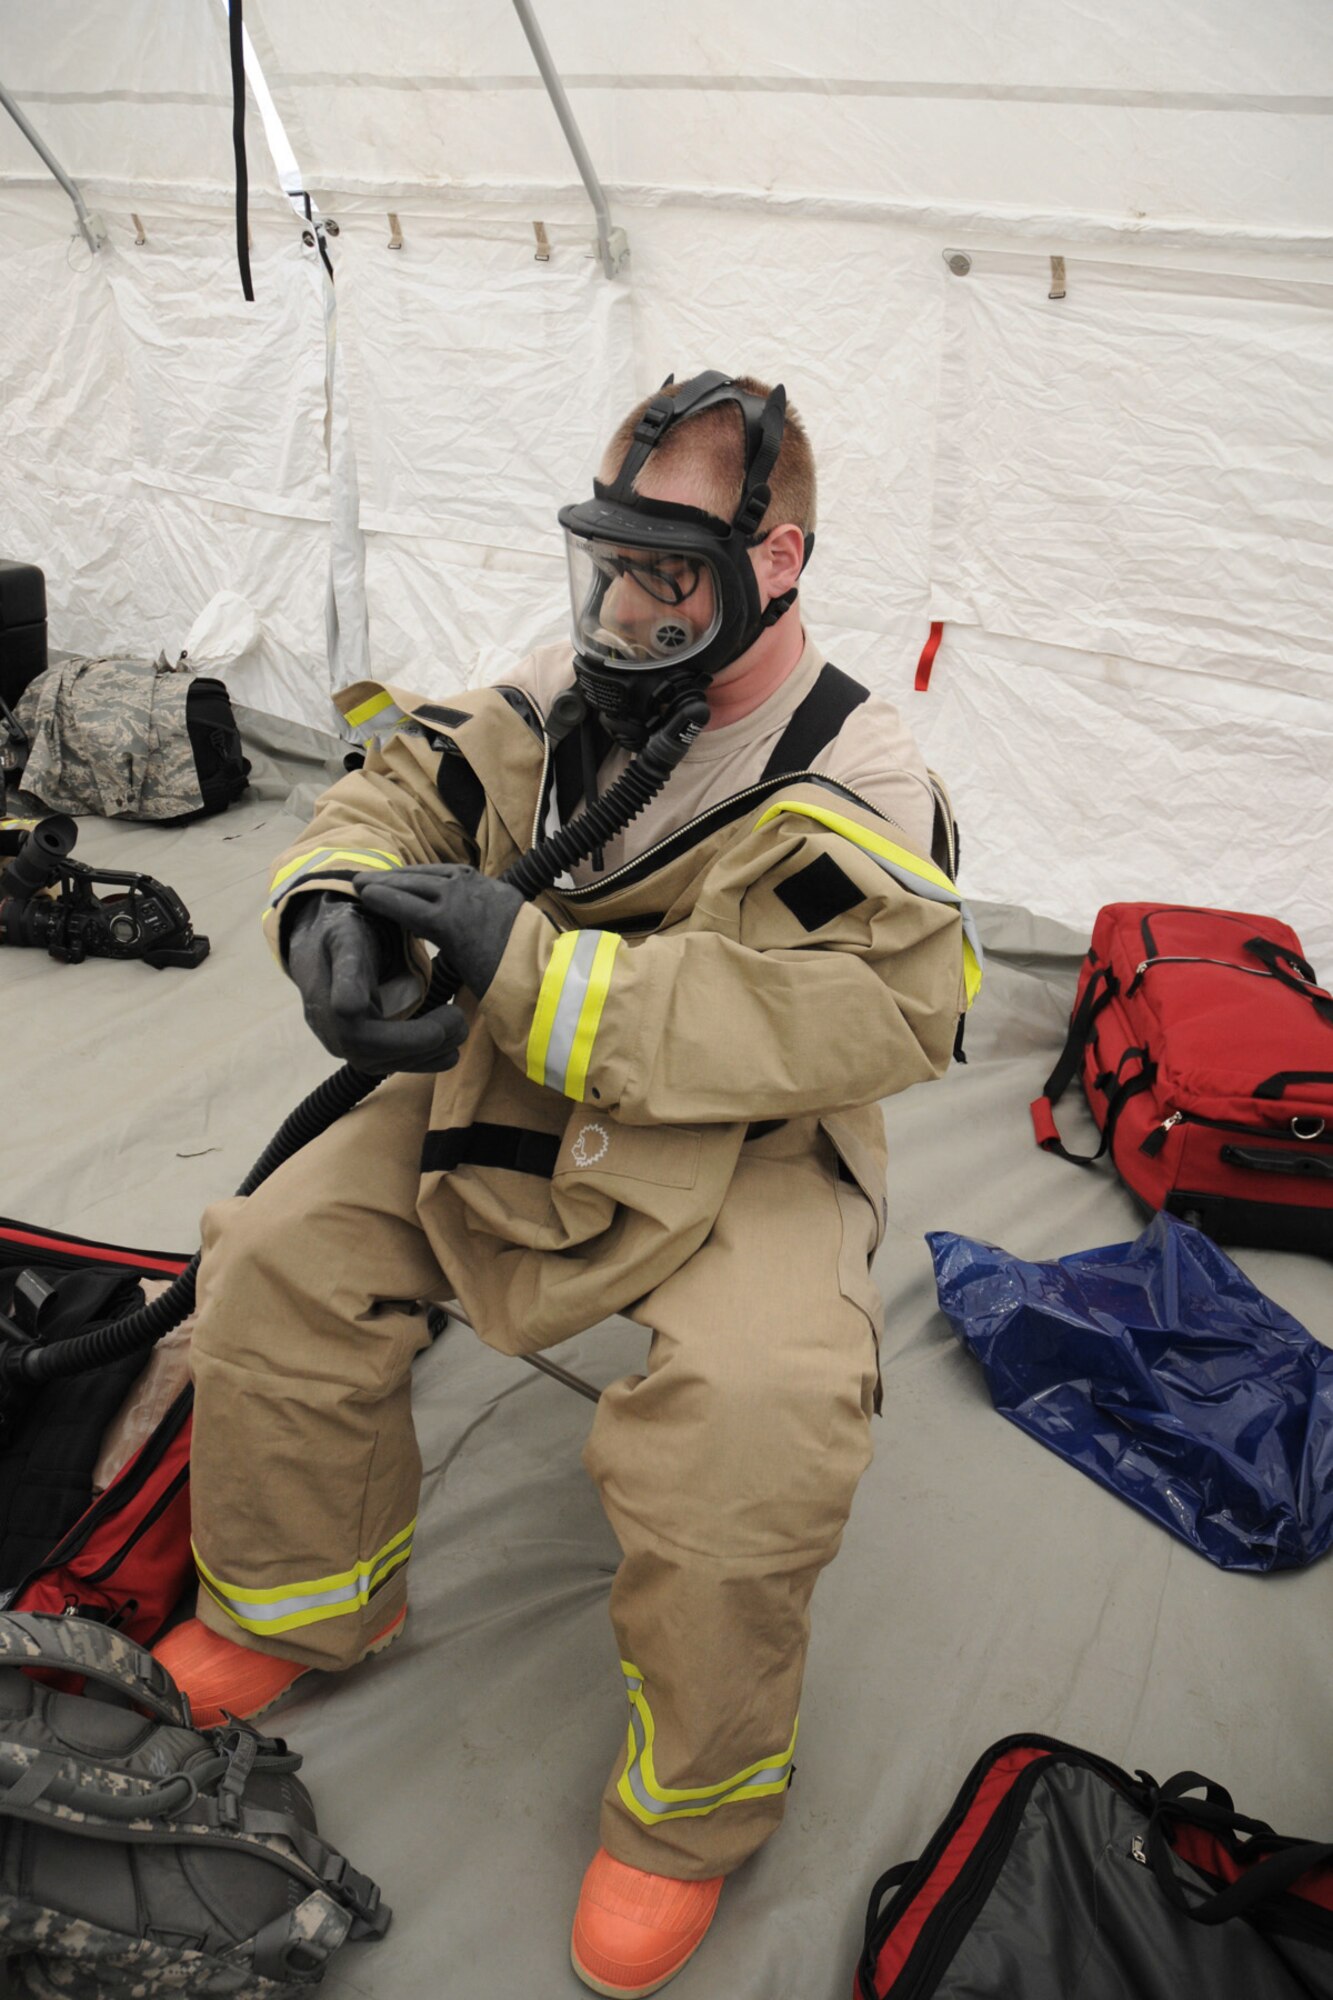 Staff Sgt. Ryan King, FSRT team member, dawns his Lion MT94 Chemical Suit to prepare to enter the scenario's "hot zone" at Camp Ashland, Nebraska on May 15, 2013. These suits add 25 degrees to the outside temperatures, hinder vision and limit movement, but they play a vital role in preparing the team for a real chemical environment.  (U.S. Air National Guard photo by Tech. Sgt. Sara M. Robinson/Released)